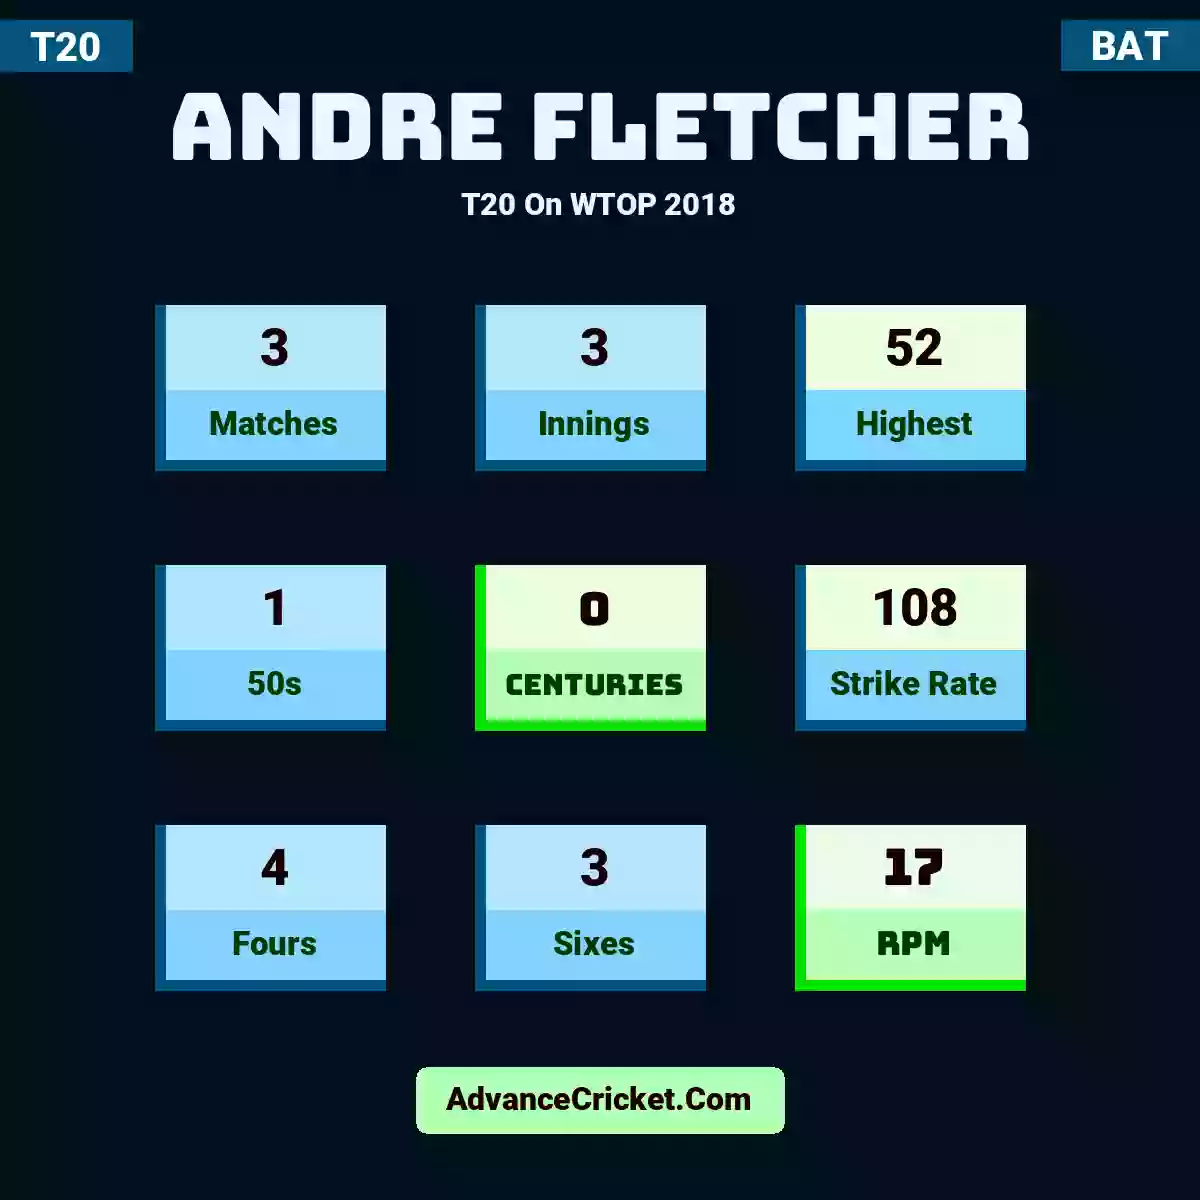 Andre Fletcher T20  On WTOP 2018, Andre Fletcher played 3 matches, scored 52 runs as highest, 1 half-centuries, and 0 centuries, with a strike rate of 108. A.Fletcher hit 4 fours and 3 sixes, with an RPM of 17.